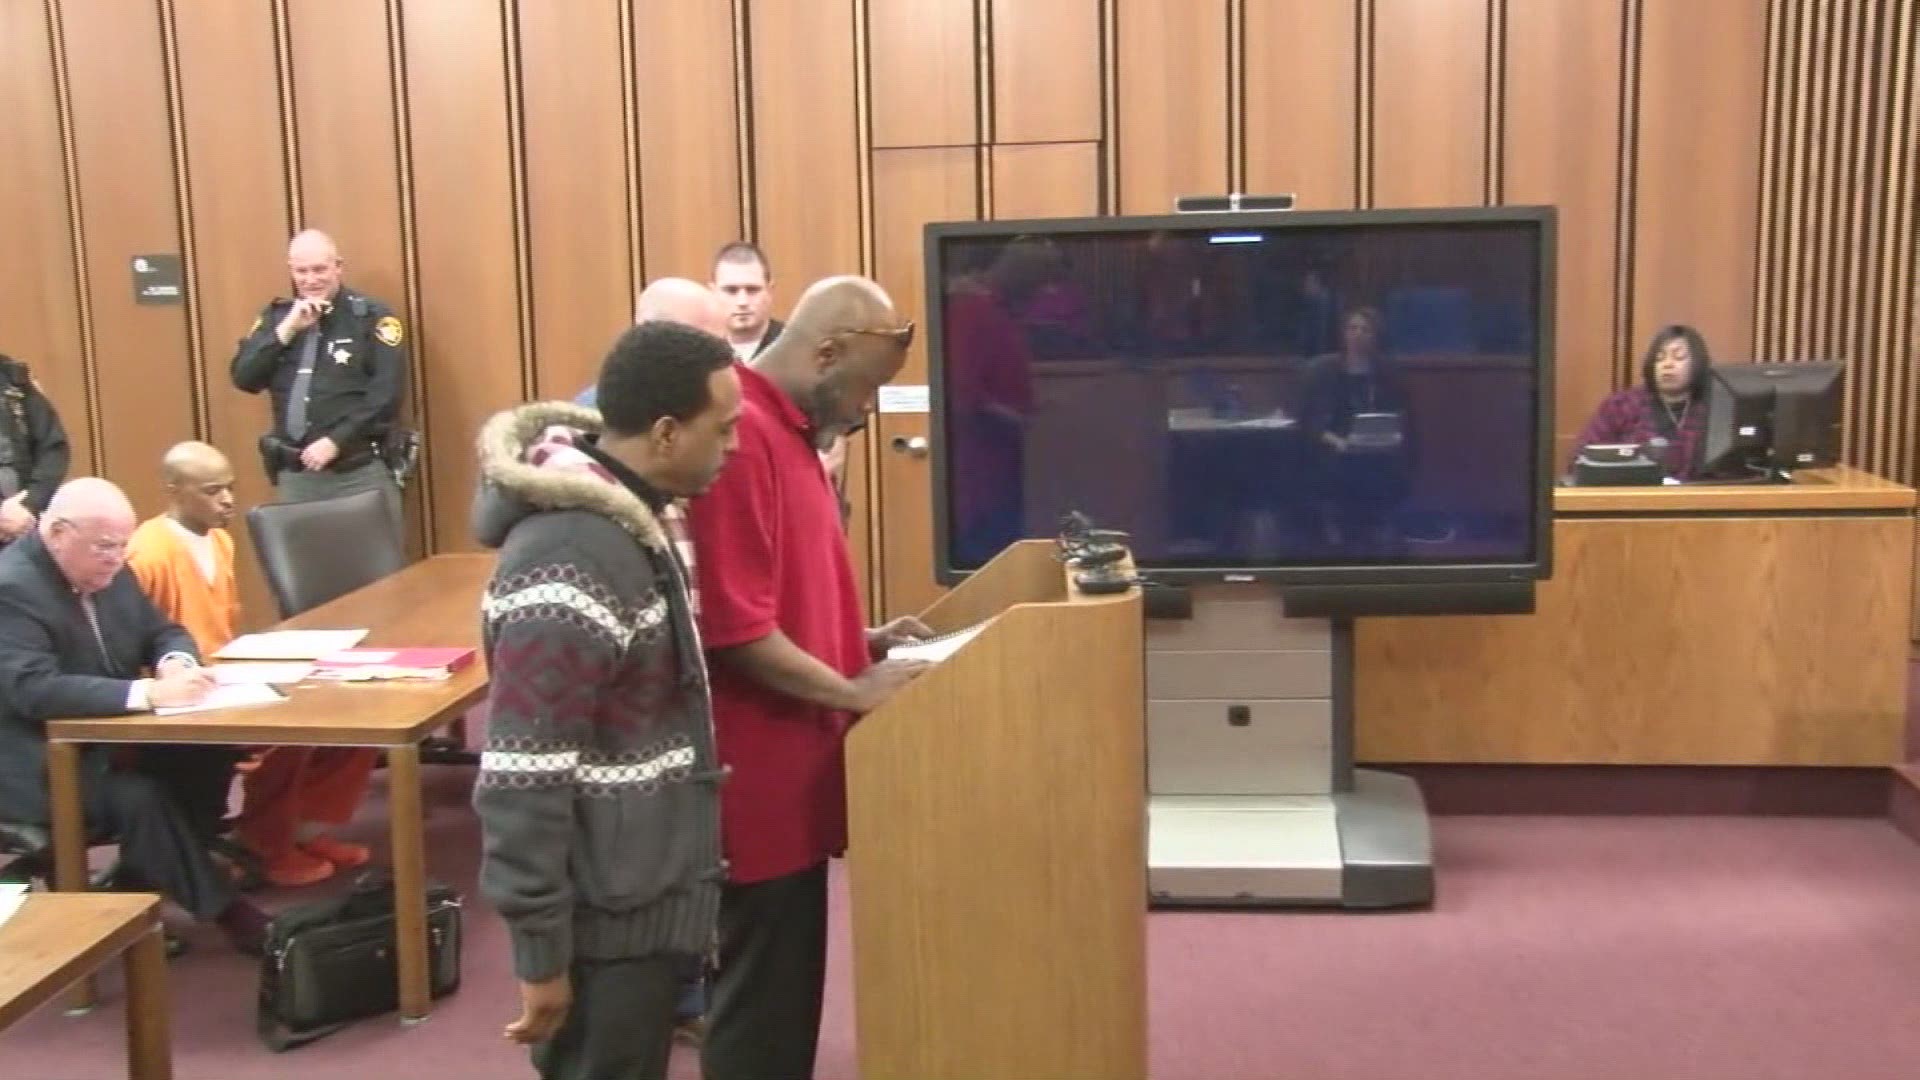 Tierra Bryant's father read an emotional statement prior to her killer's sentencing.